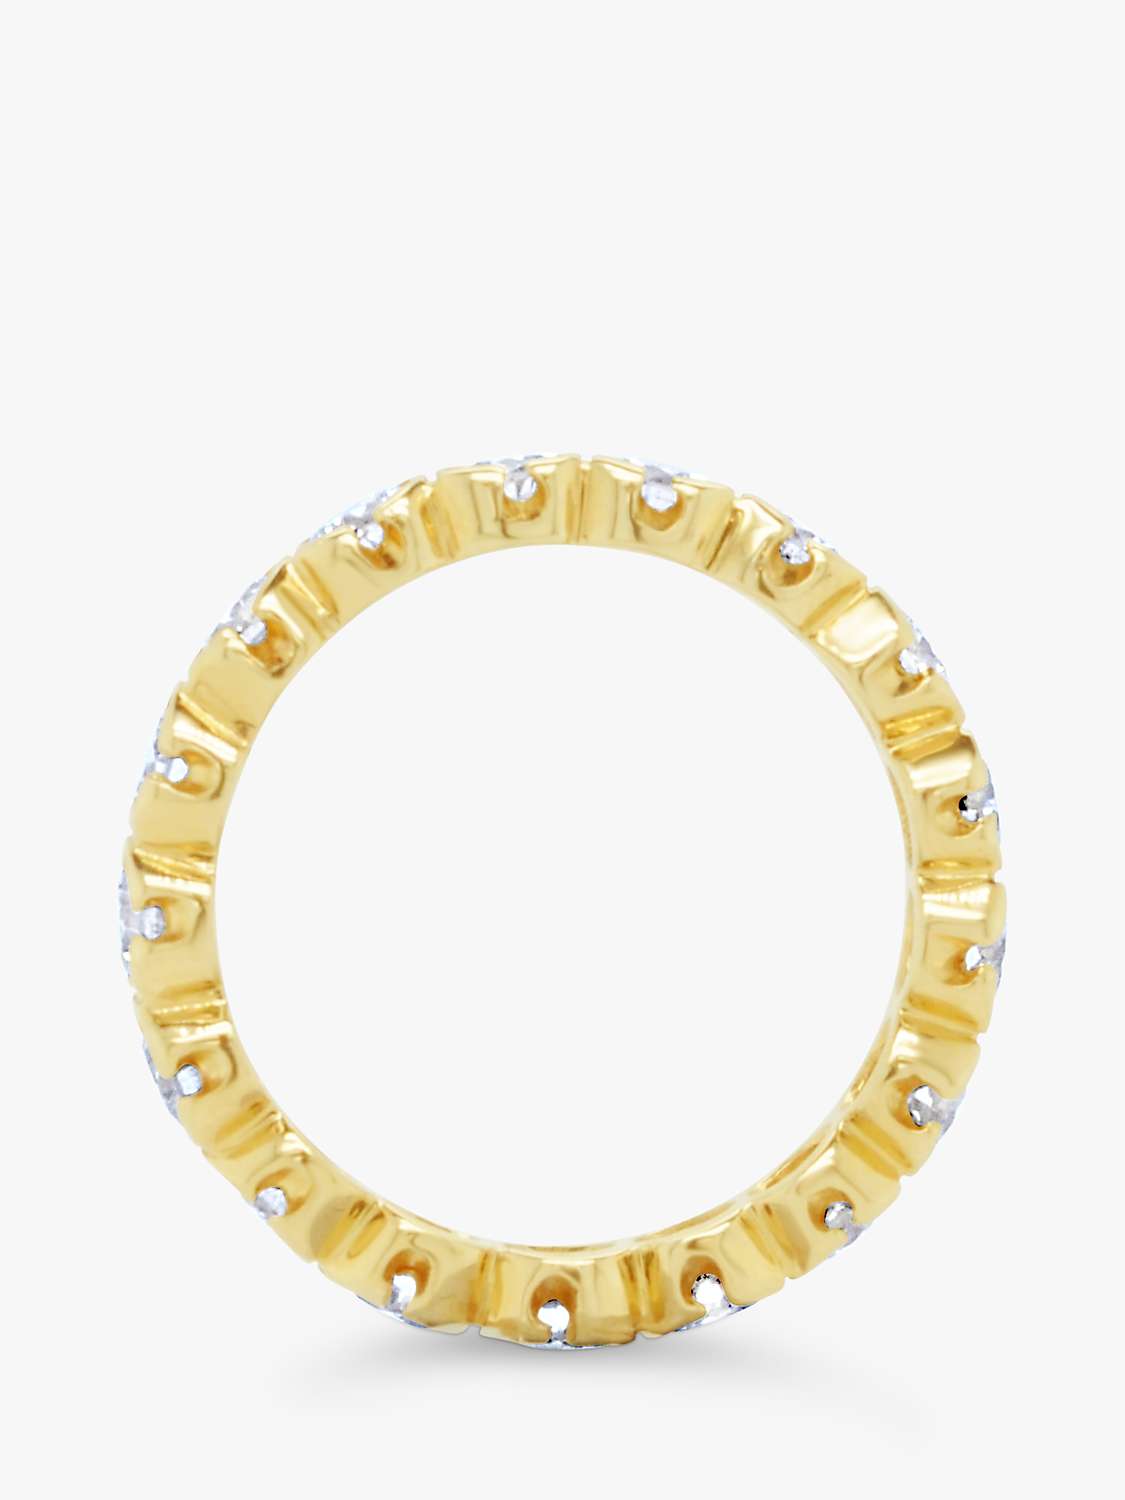 Buy Milton & Humble Jewellery Second Hand 18ct Yellow Gold Diamond Eternity Ring, Gold Online at johnlewis.com